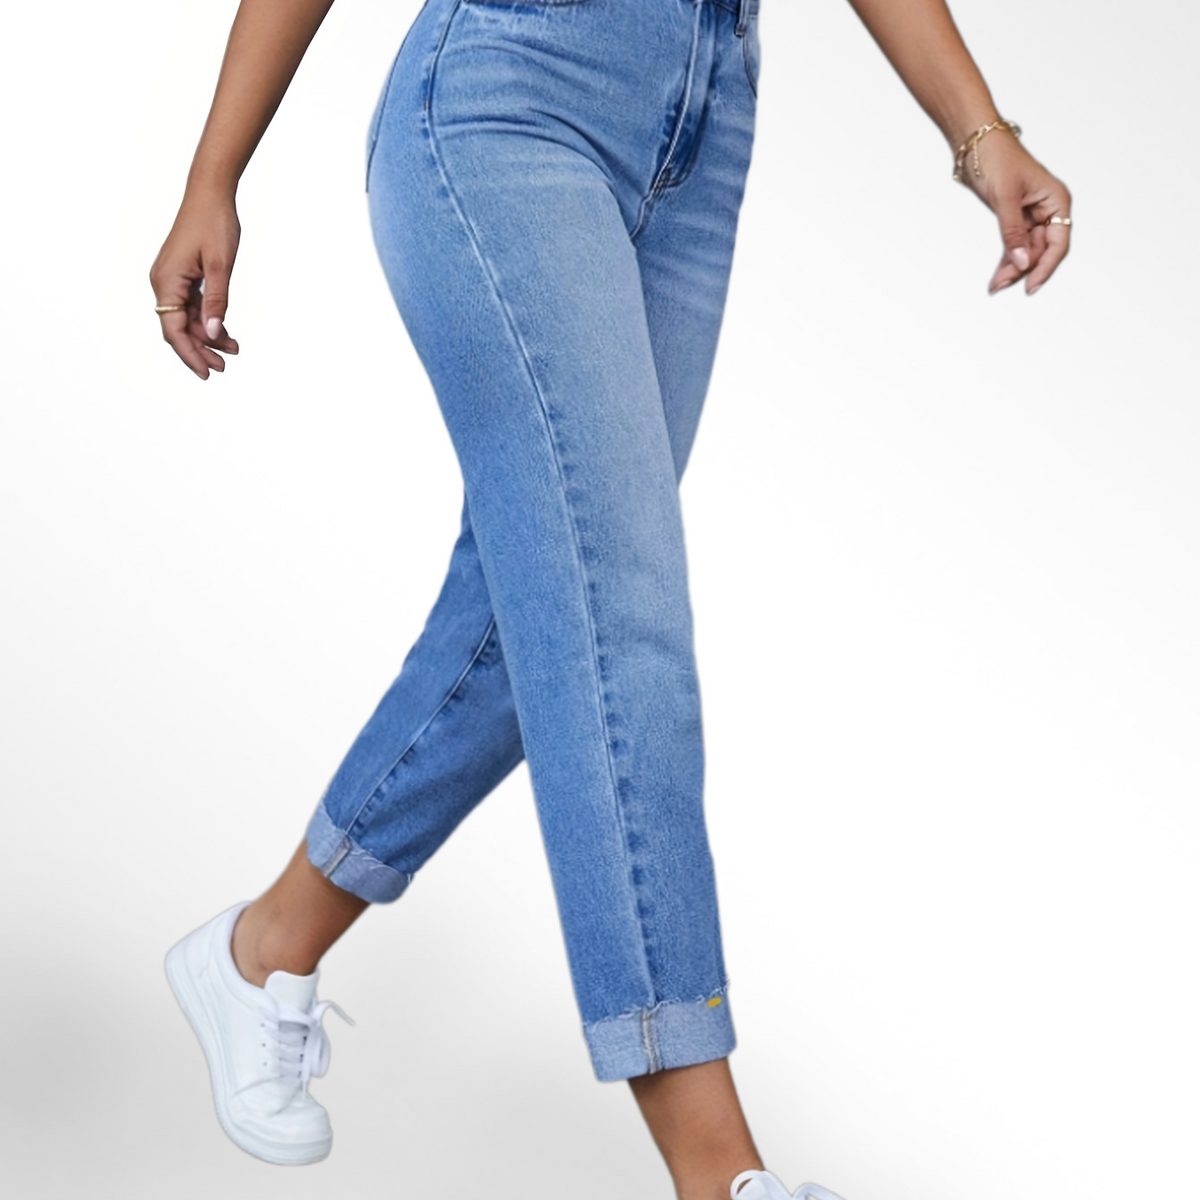 「binfenxie」Cuffed Light Wash Blue High Rise Cropped Jeans, Water Ripple Embossed Fayed Trim Denim Pants, Casual & Street Style, Women's Denim Jeans & Clothing